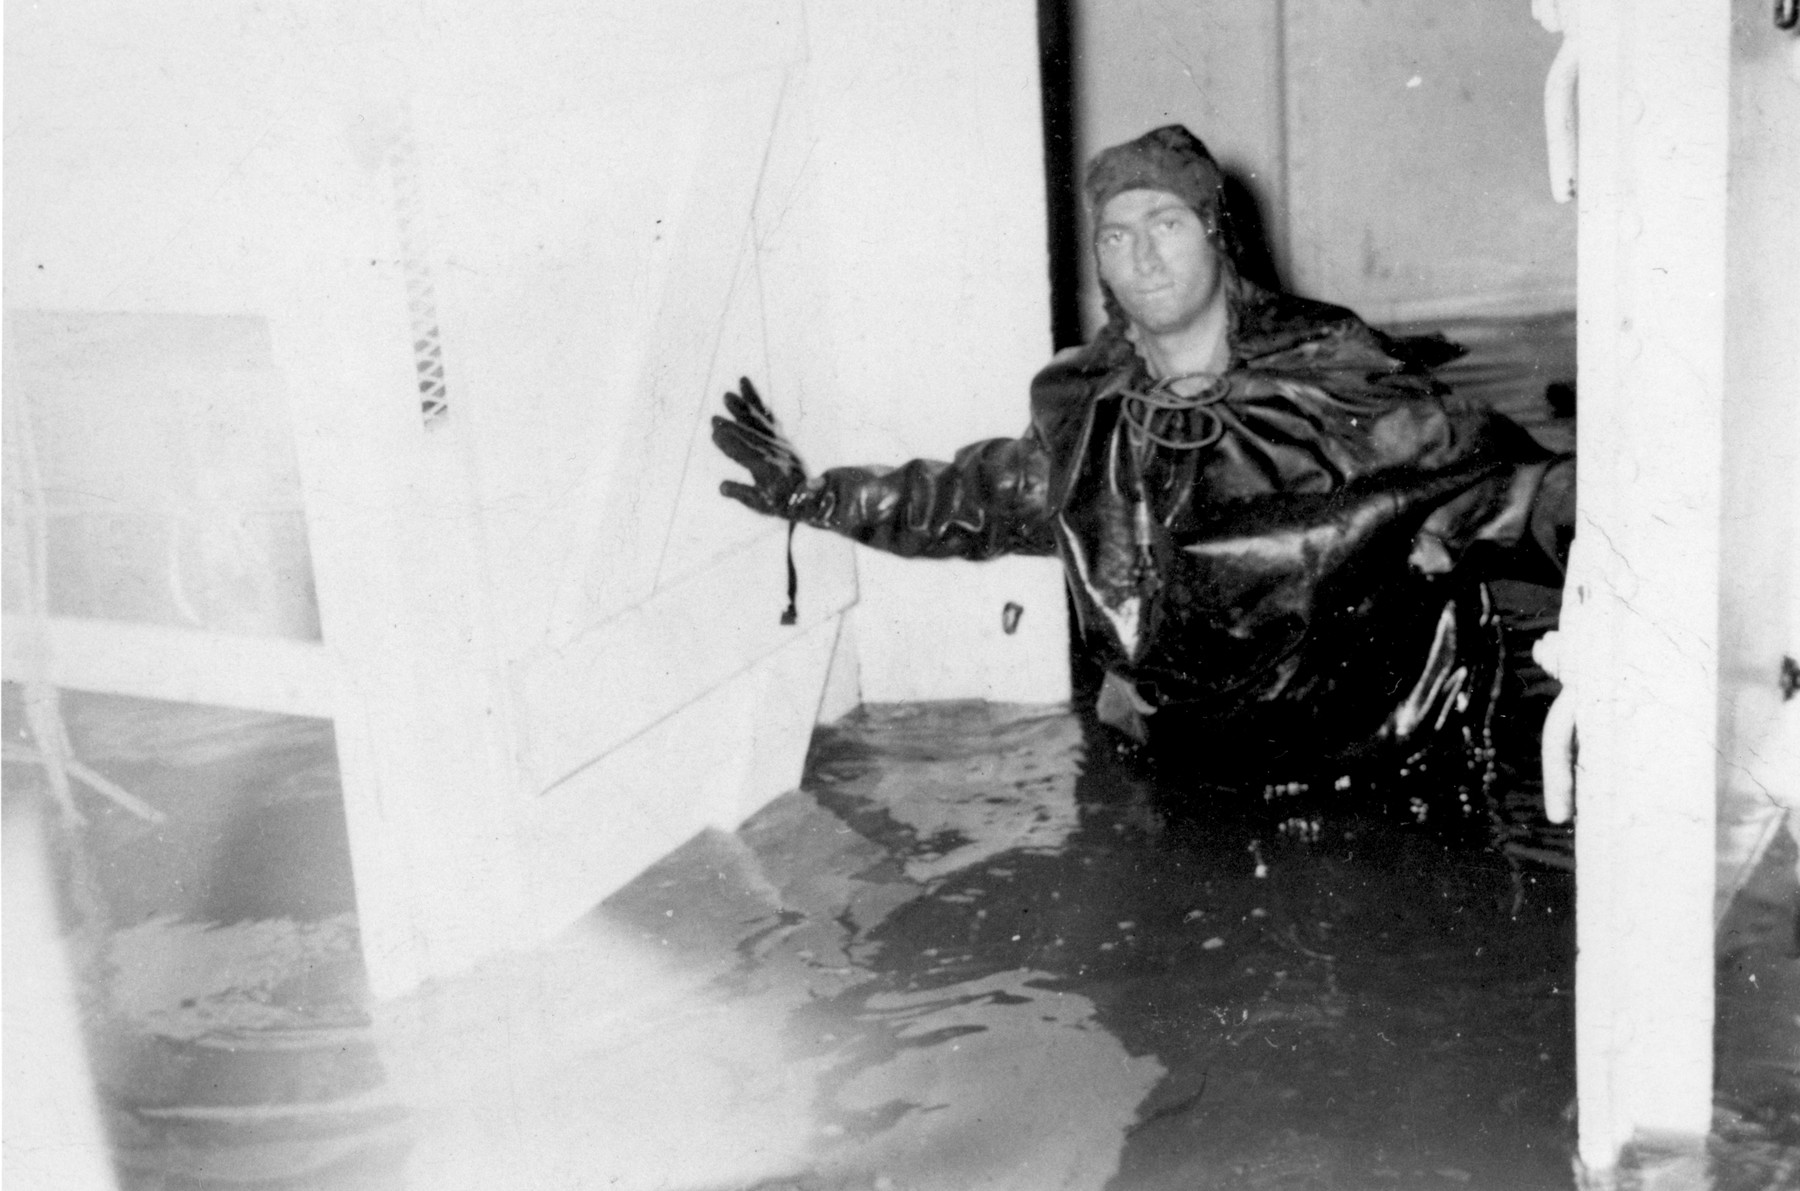 Murray Aronoff stands knee-deep in water in the engine room of the President Warfield after the gale that nearly sank the ship during its first attempt to cross the Atlantic Ocean.